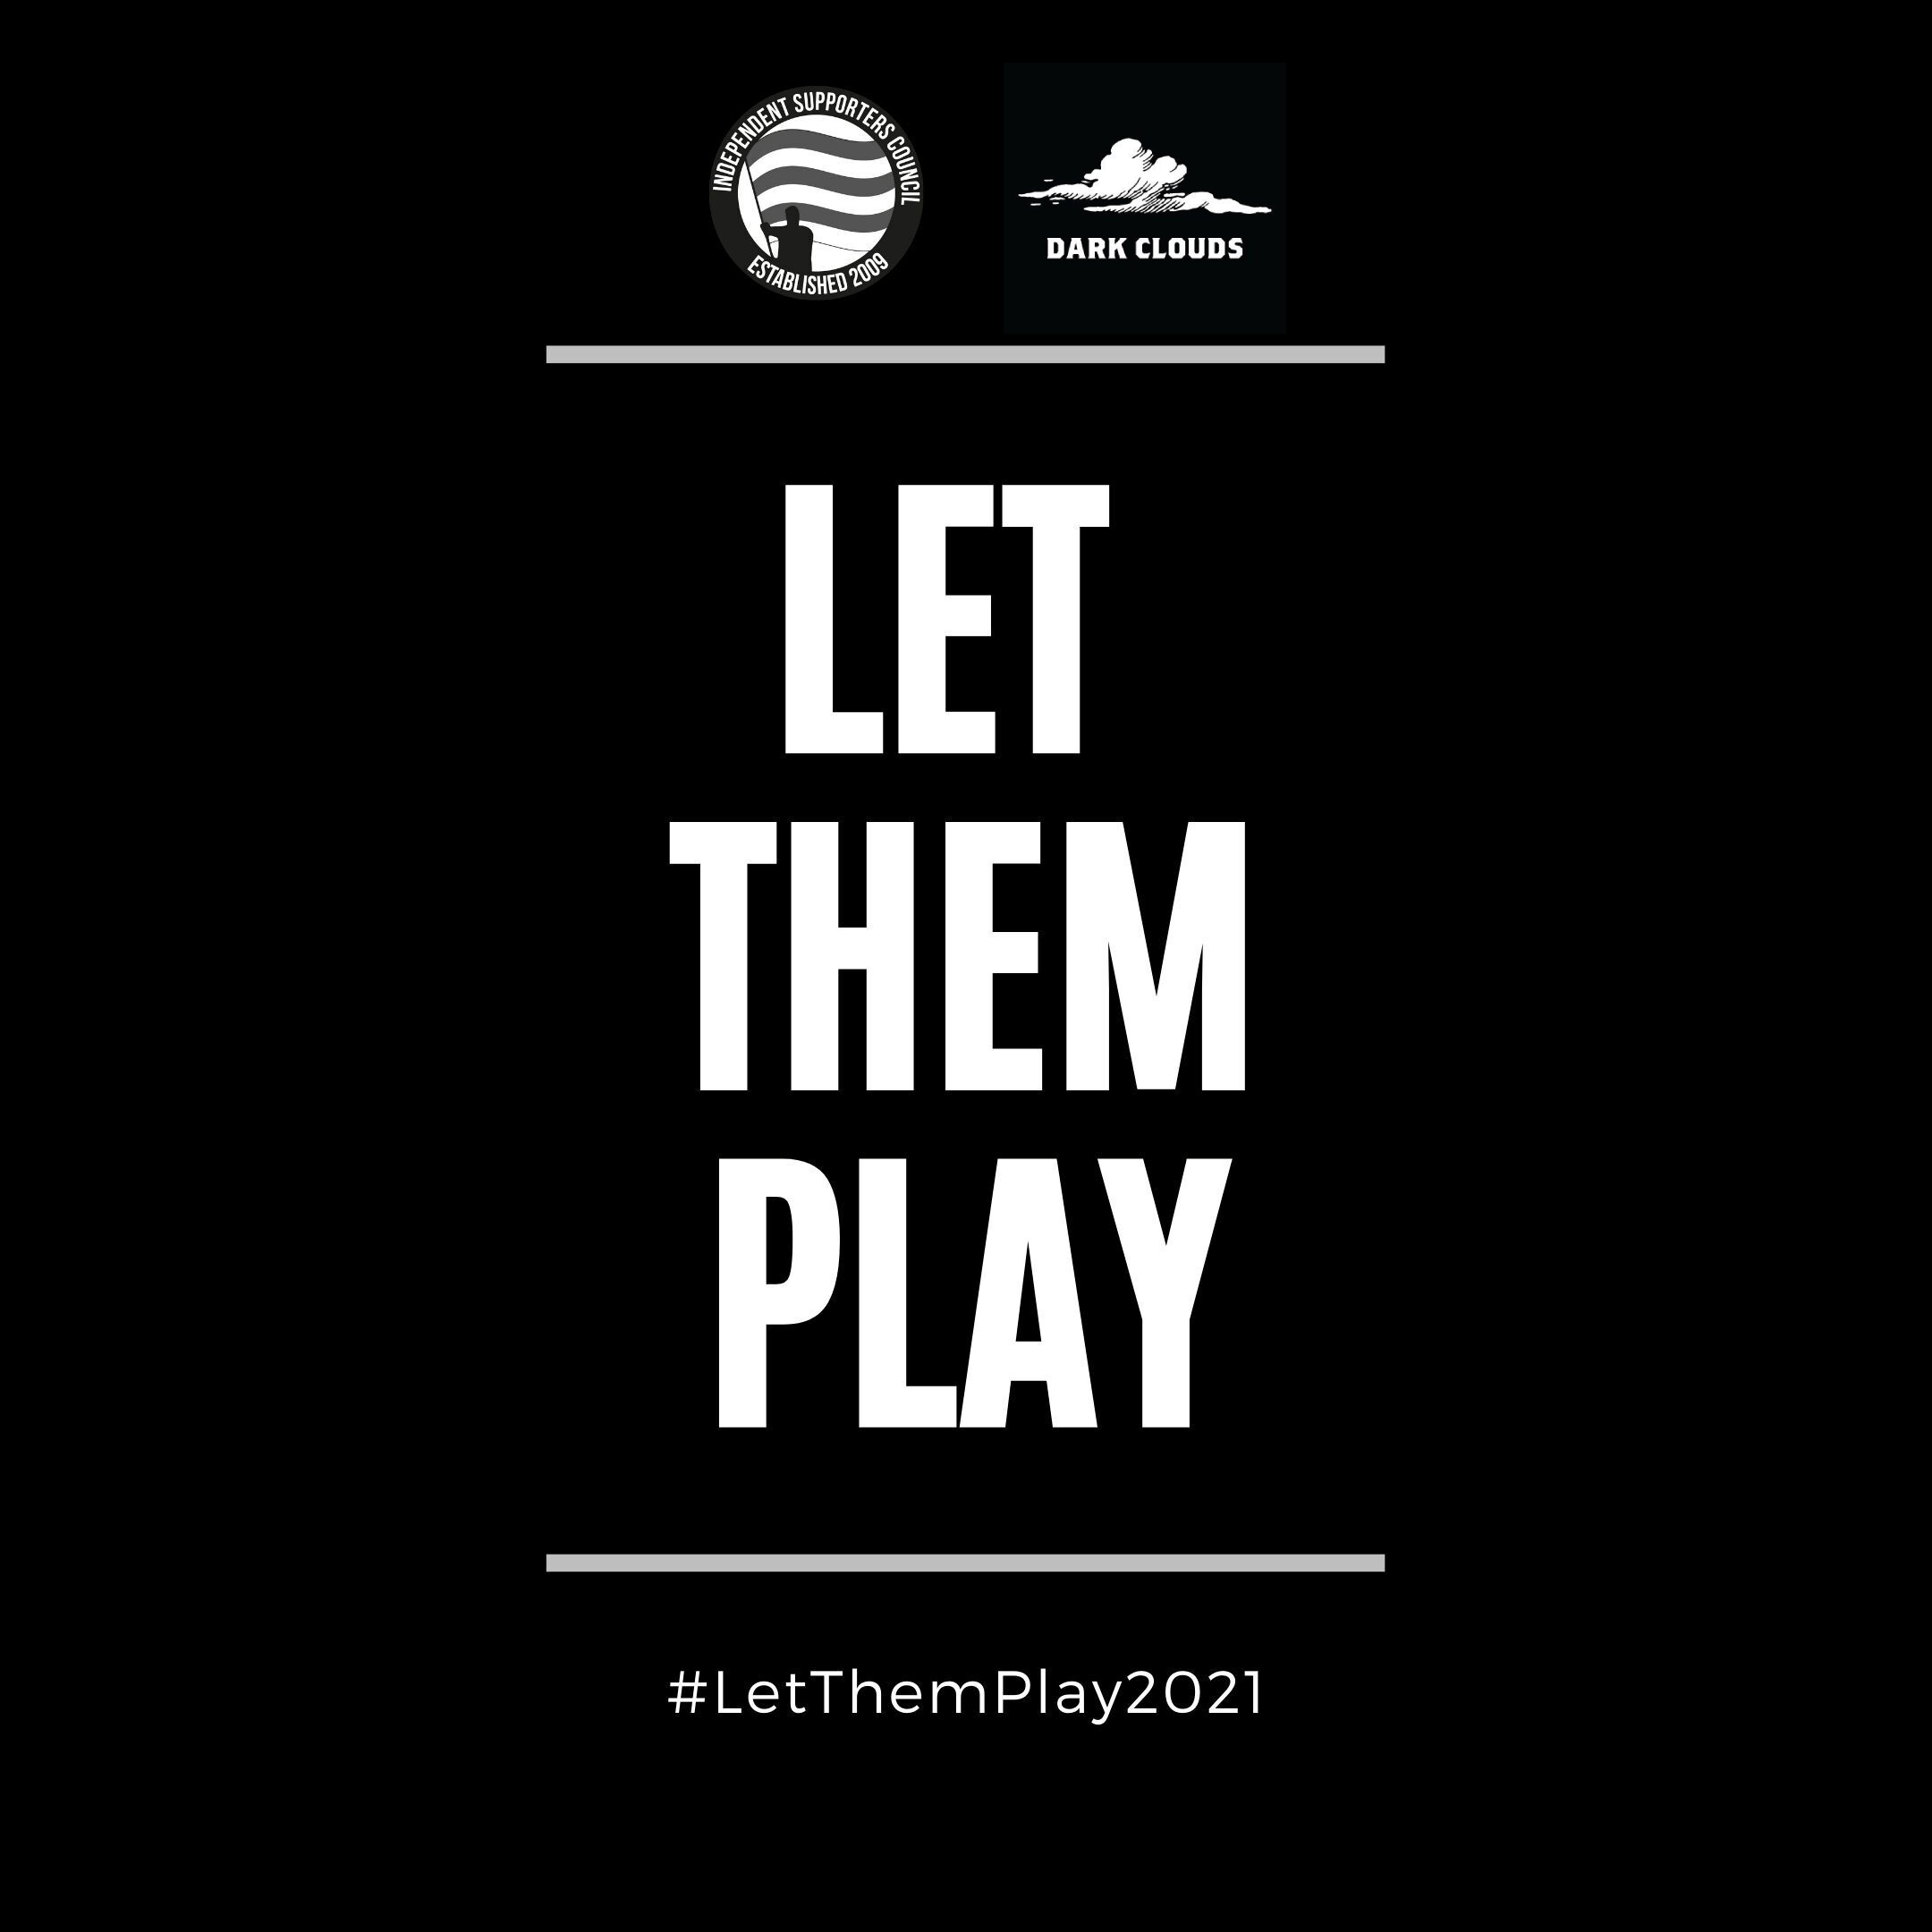 The Independent Supporters Council logo and Dark Clouds logo sit atop a black square with "LET THEM PLAY" and "#LetThemPlay2021" written underneath.